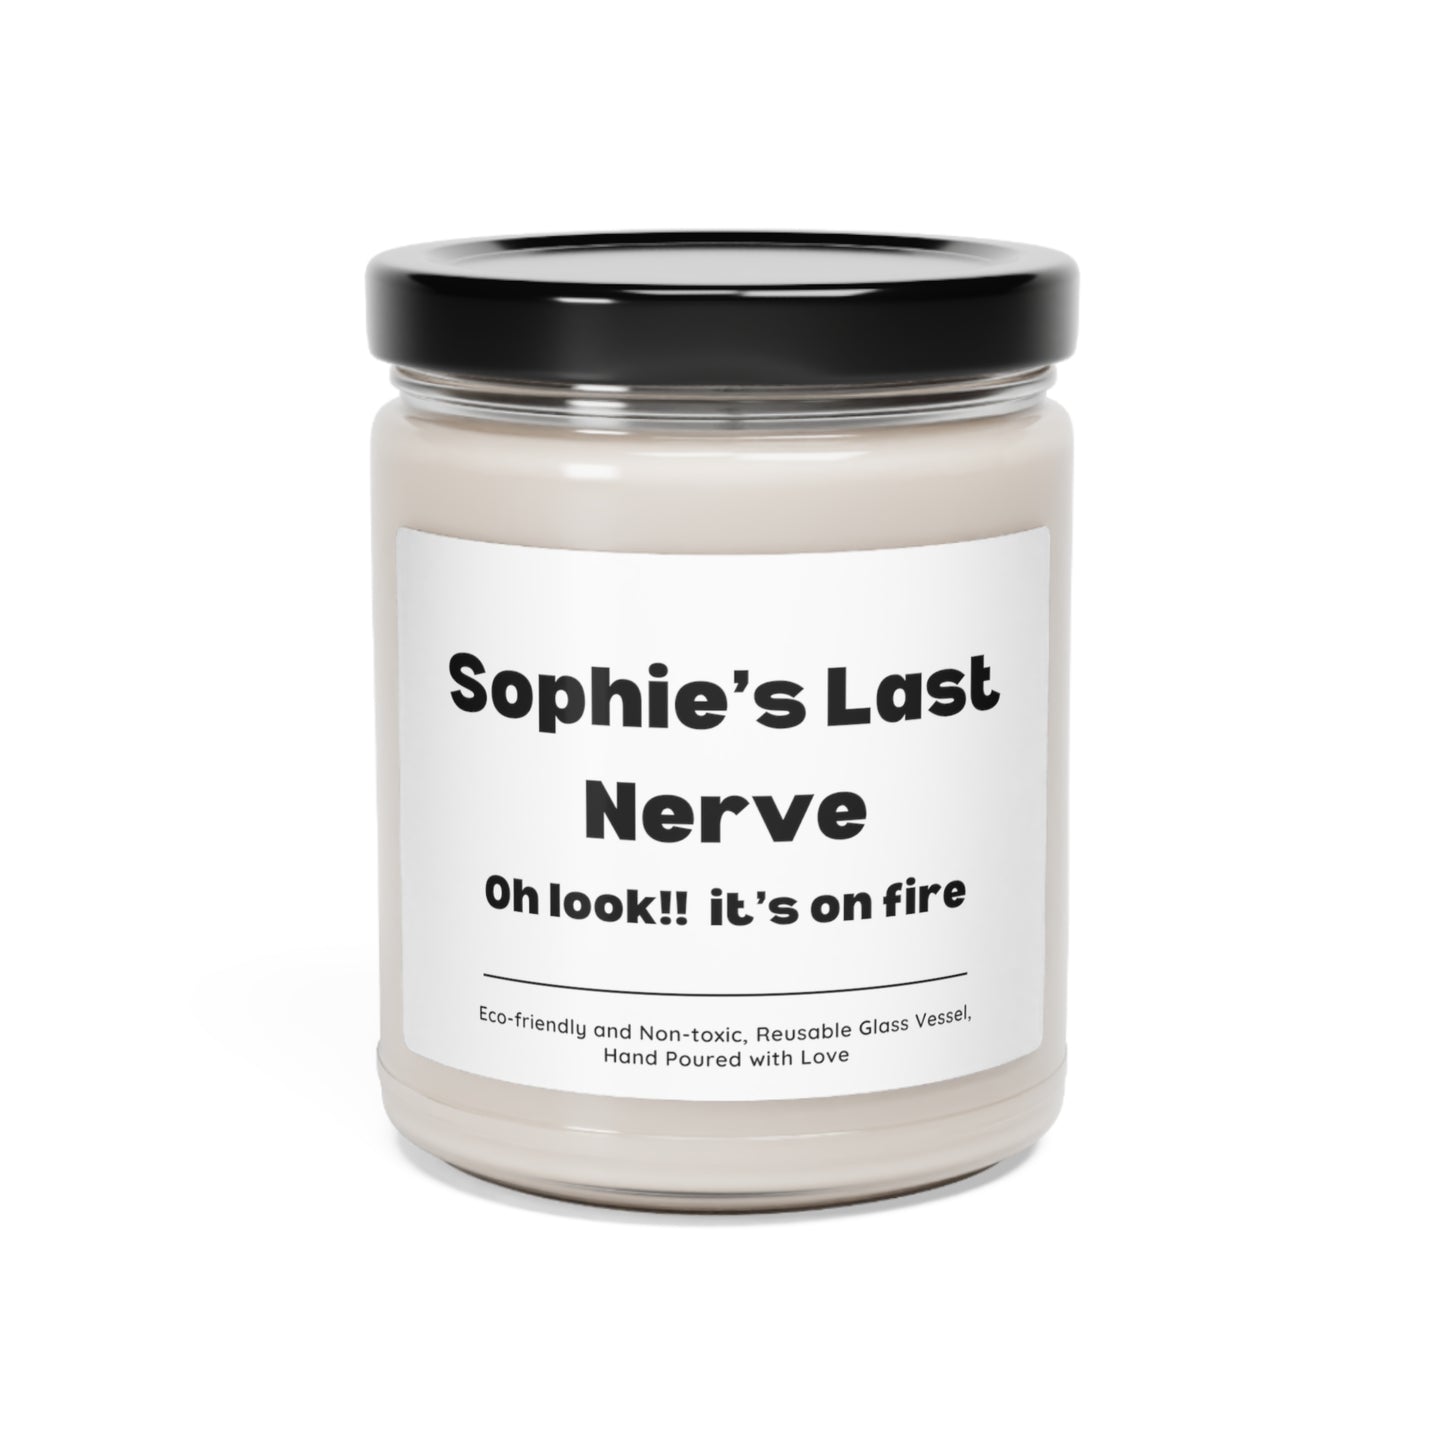 3.Scented Soy Candle, 9oz